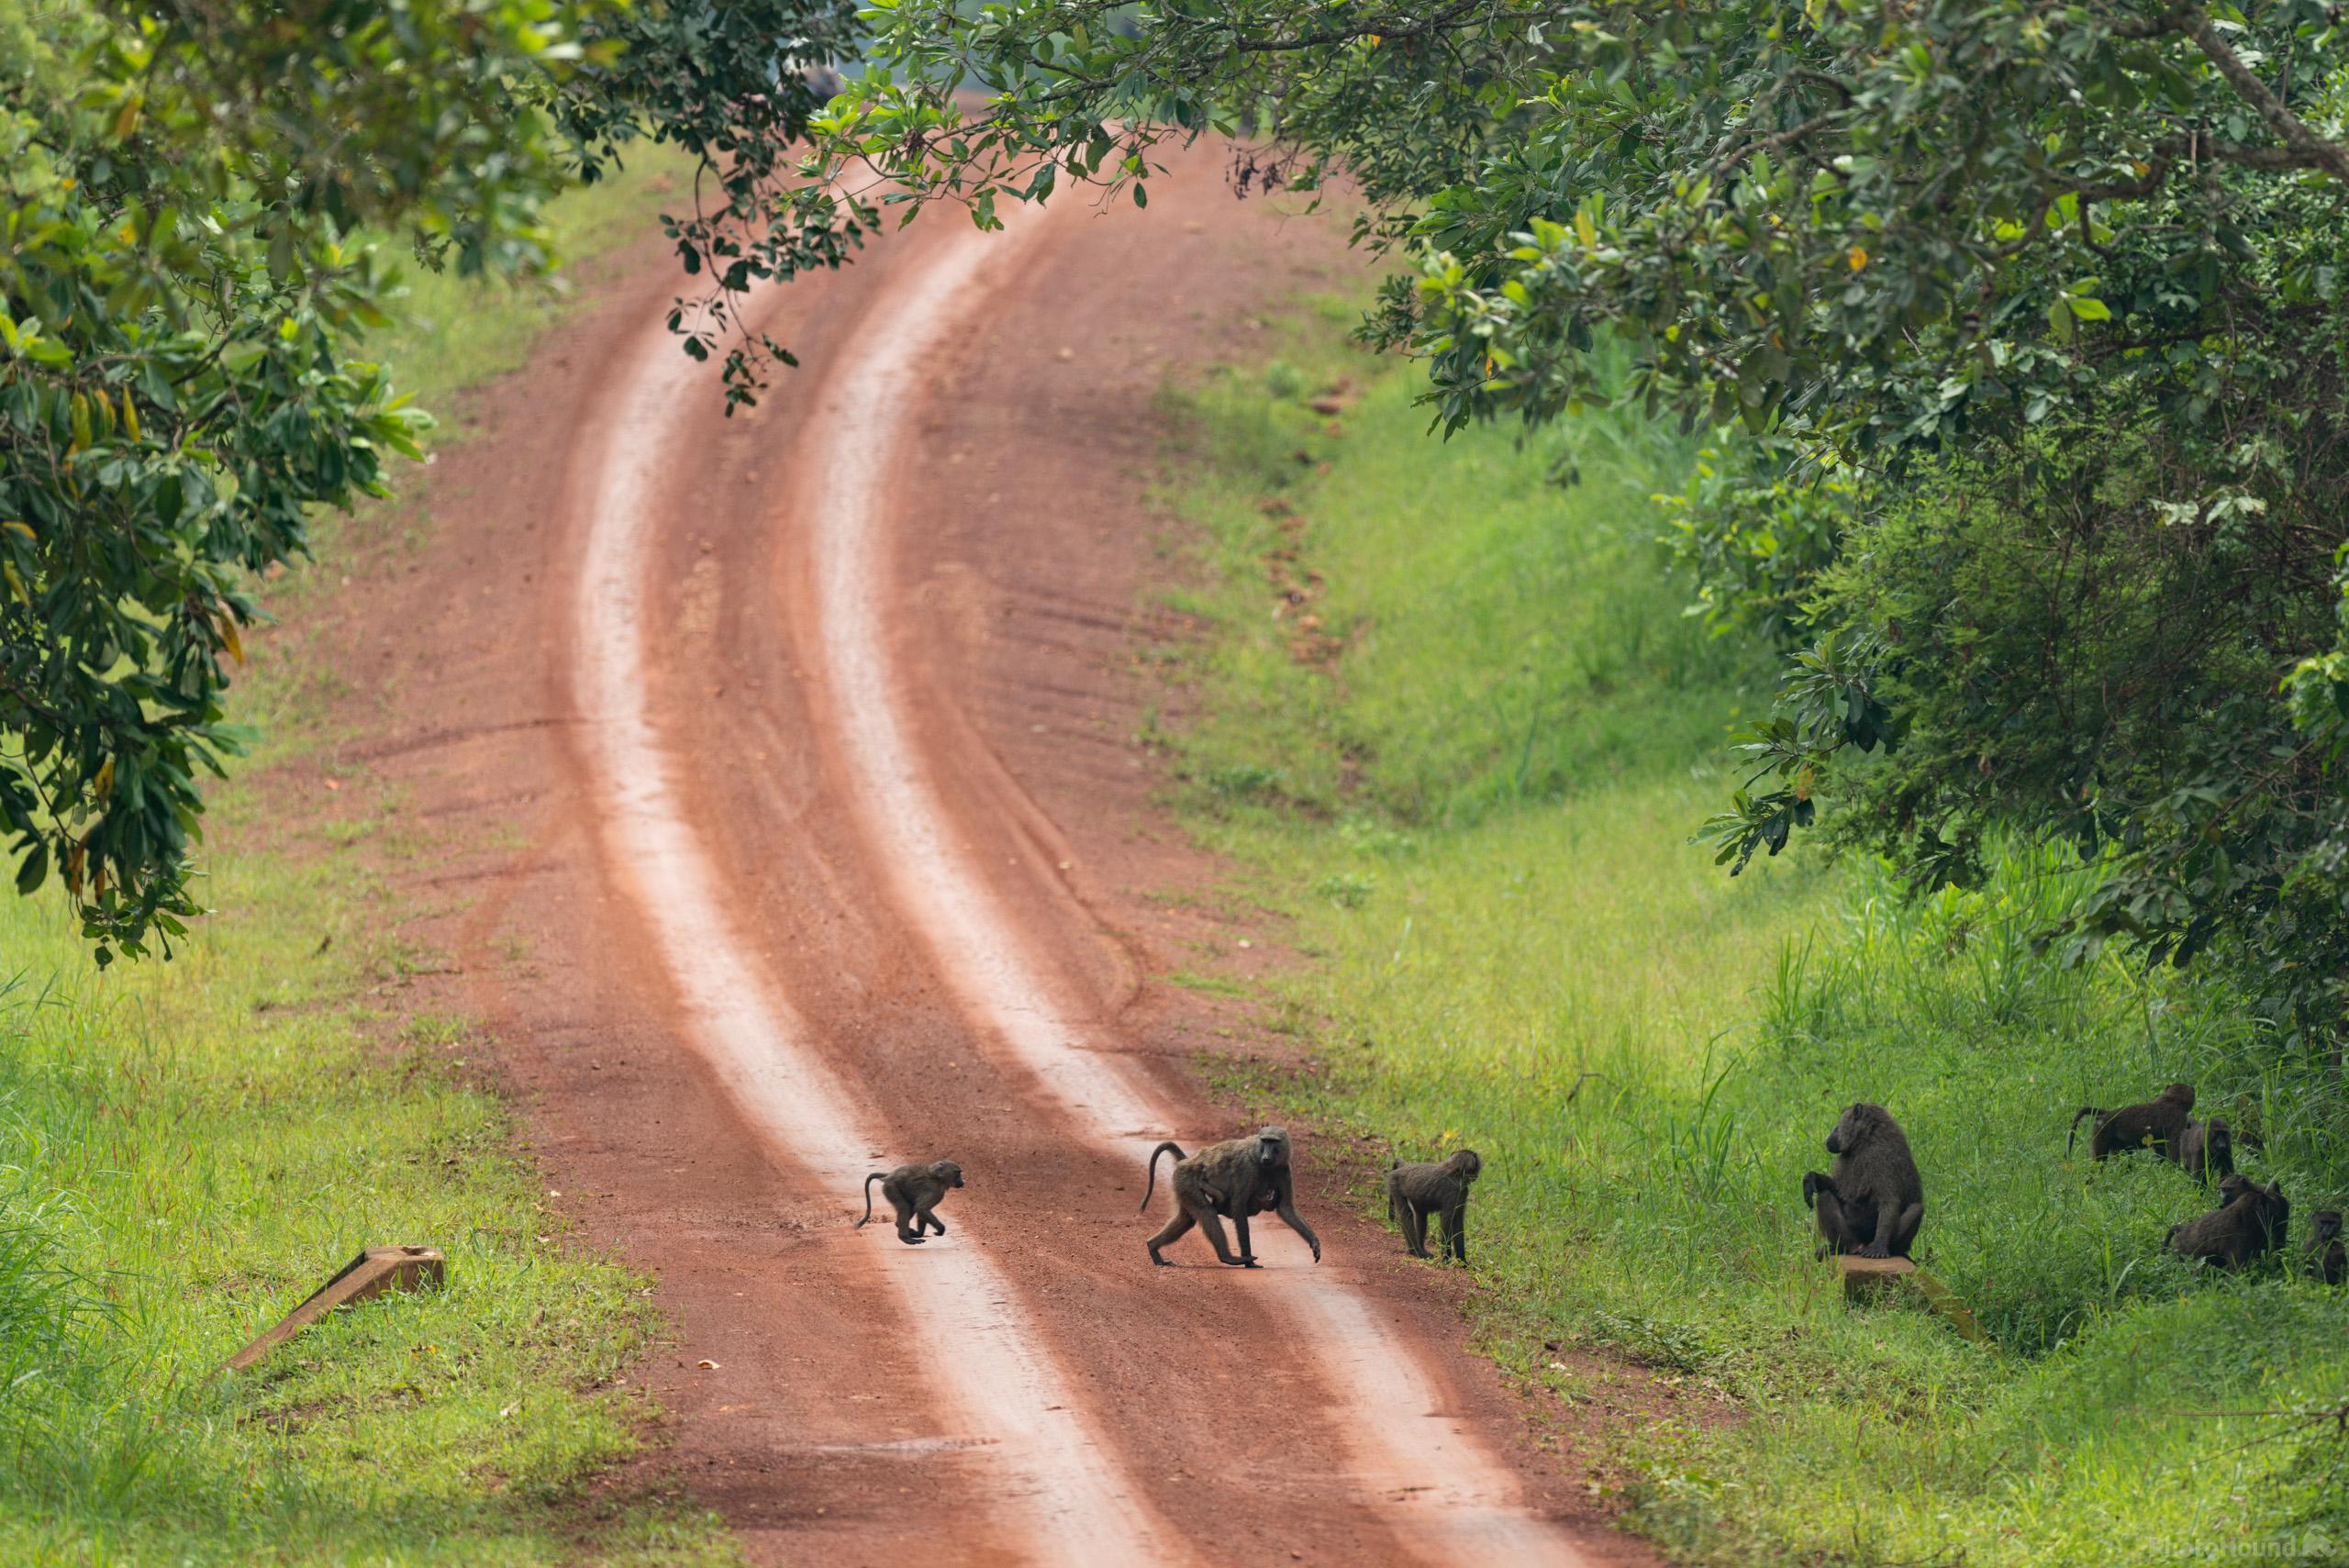 Image of Chimpanzee Tracking in Budongo Forest by Luka Esenko